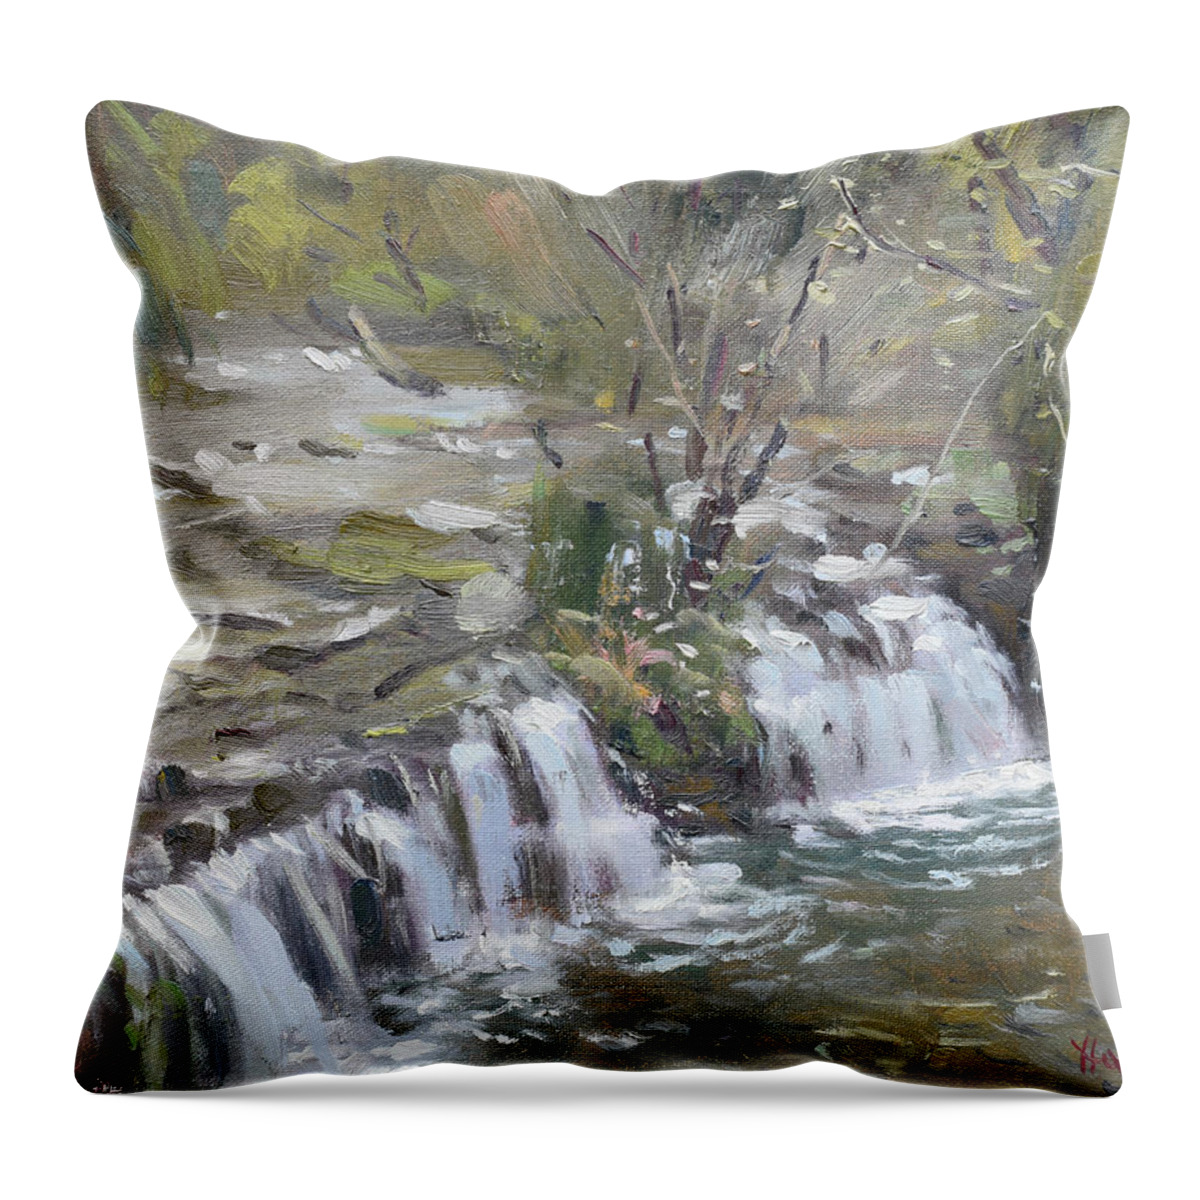 Creek Throw Pillow featuring the painting Stream in Goat Island by Ylli Haruni